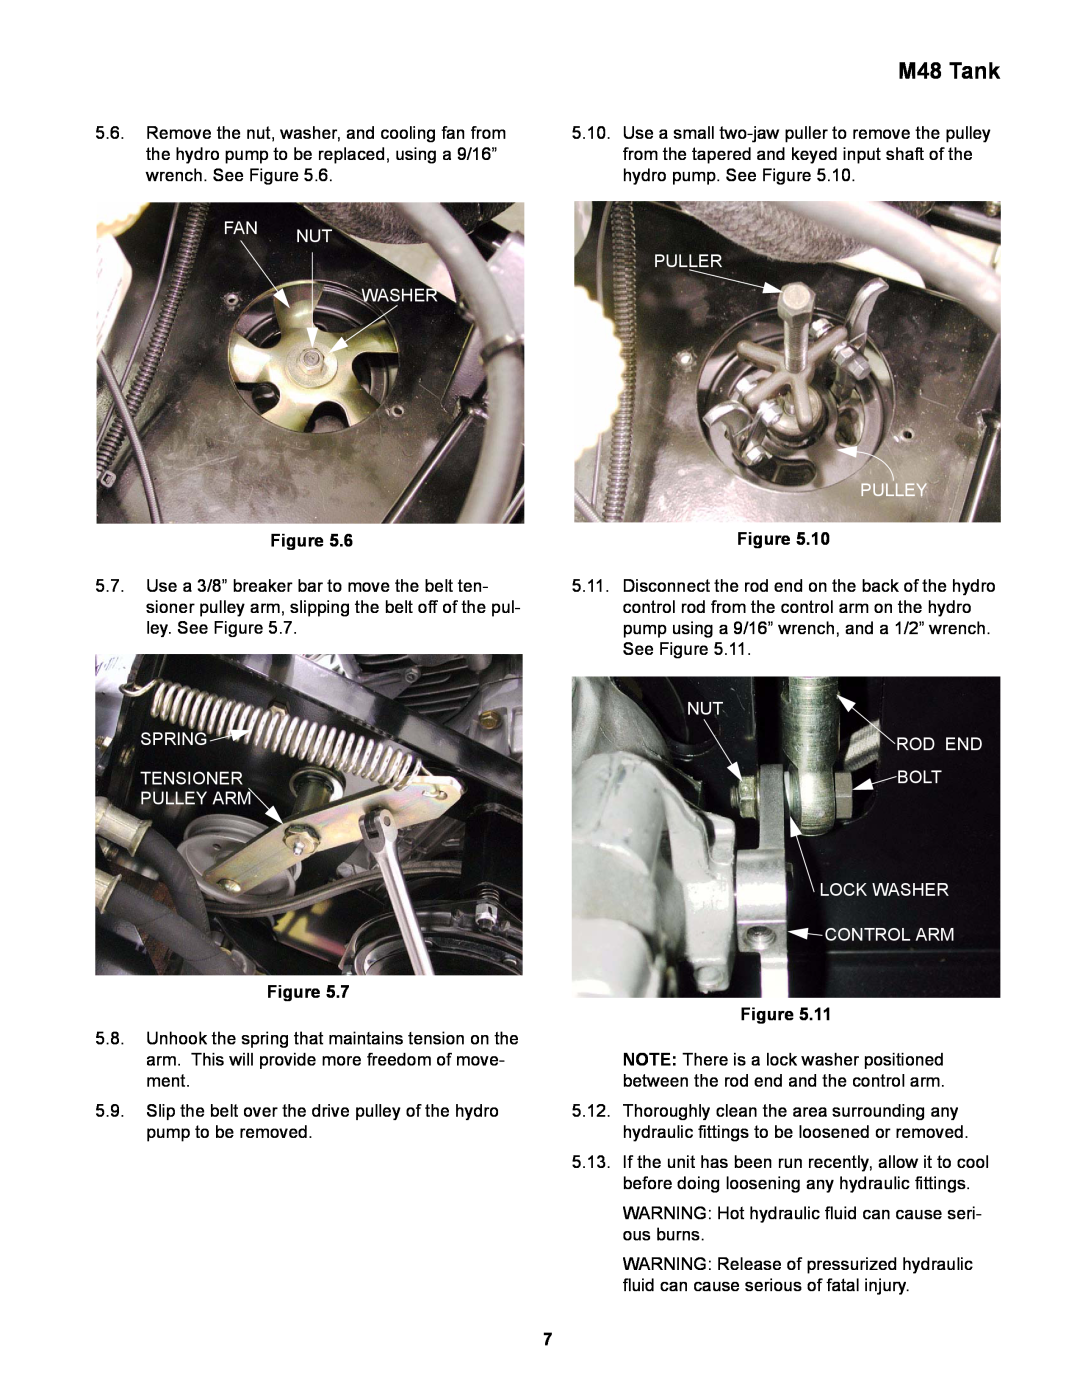 Cub Cadet service manual M48 Tank, Fan Nut Washer, Figure, Spring Tensioner Pulley Arm, Puller Pulley 